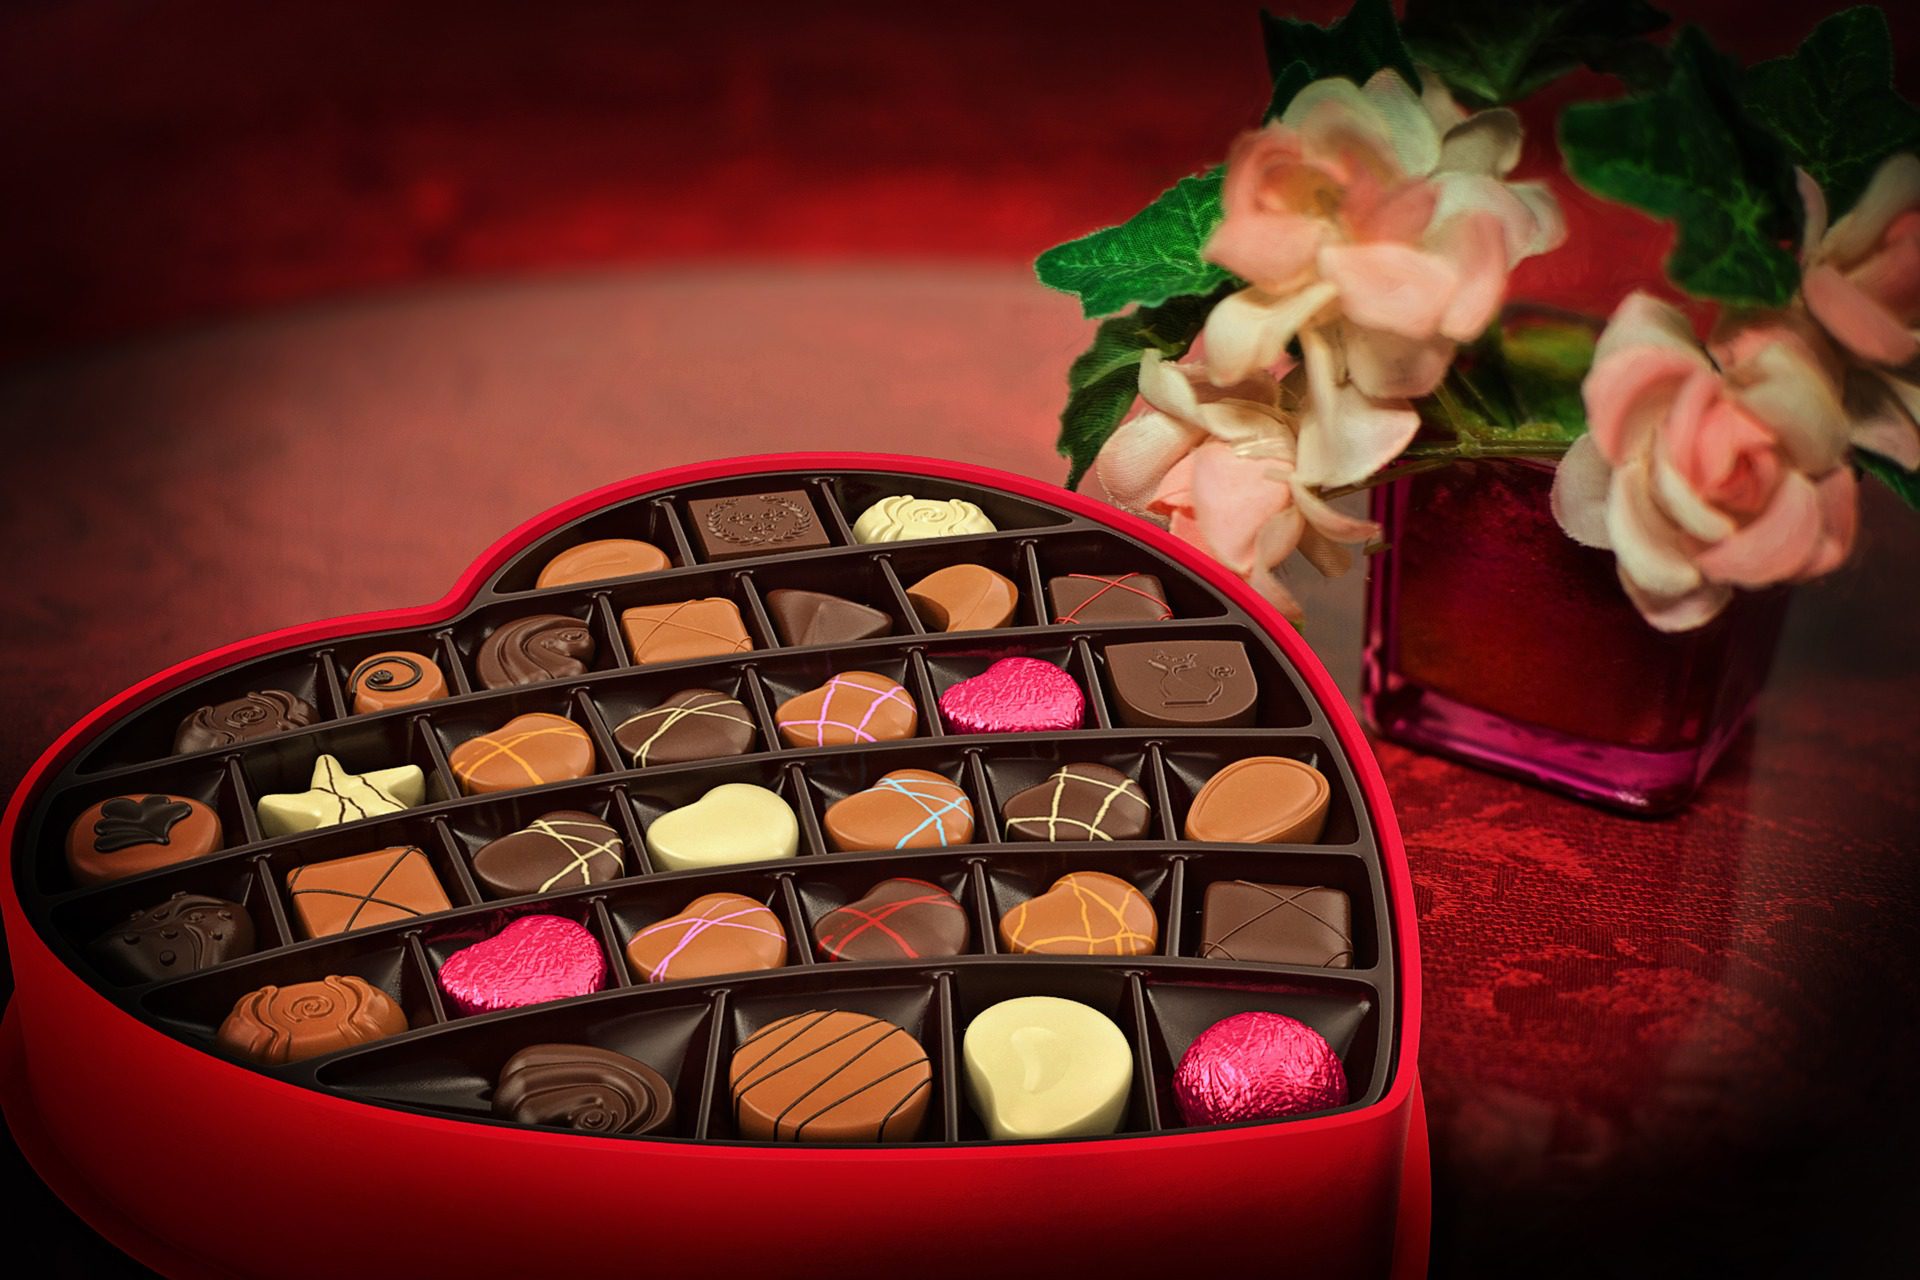 14 Romantic Chocolate Gifts for your Sweetheart this Valentine’s Day